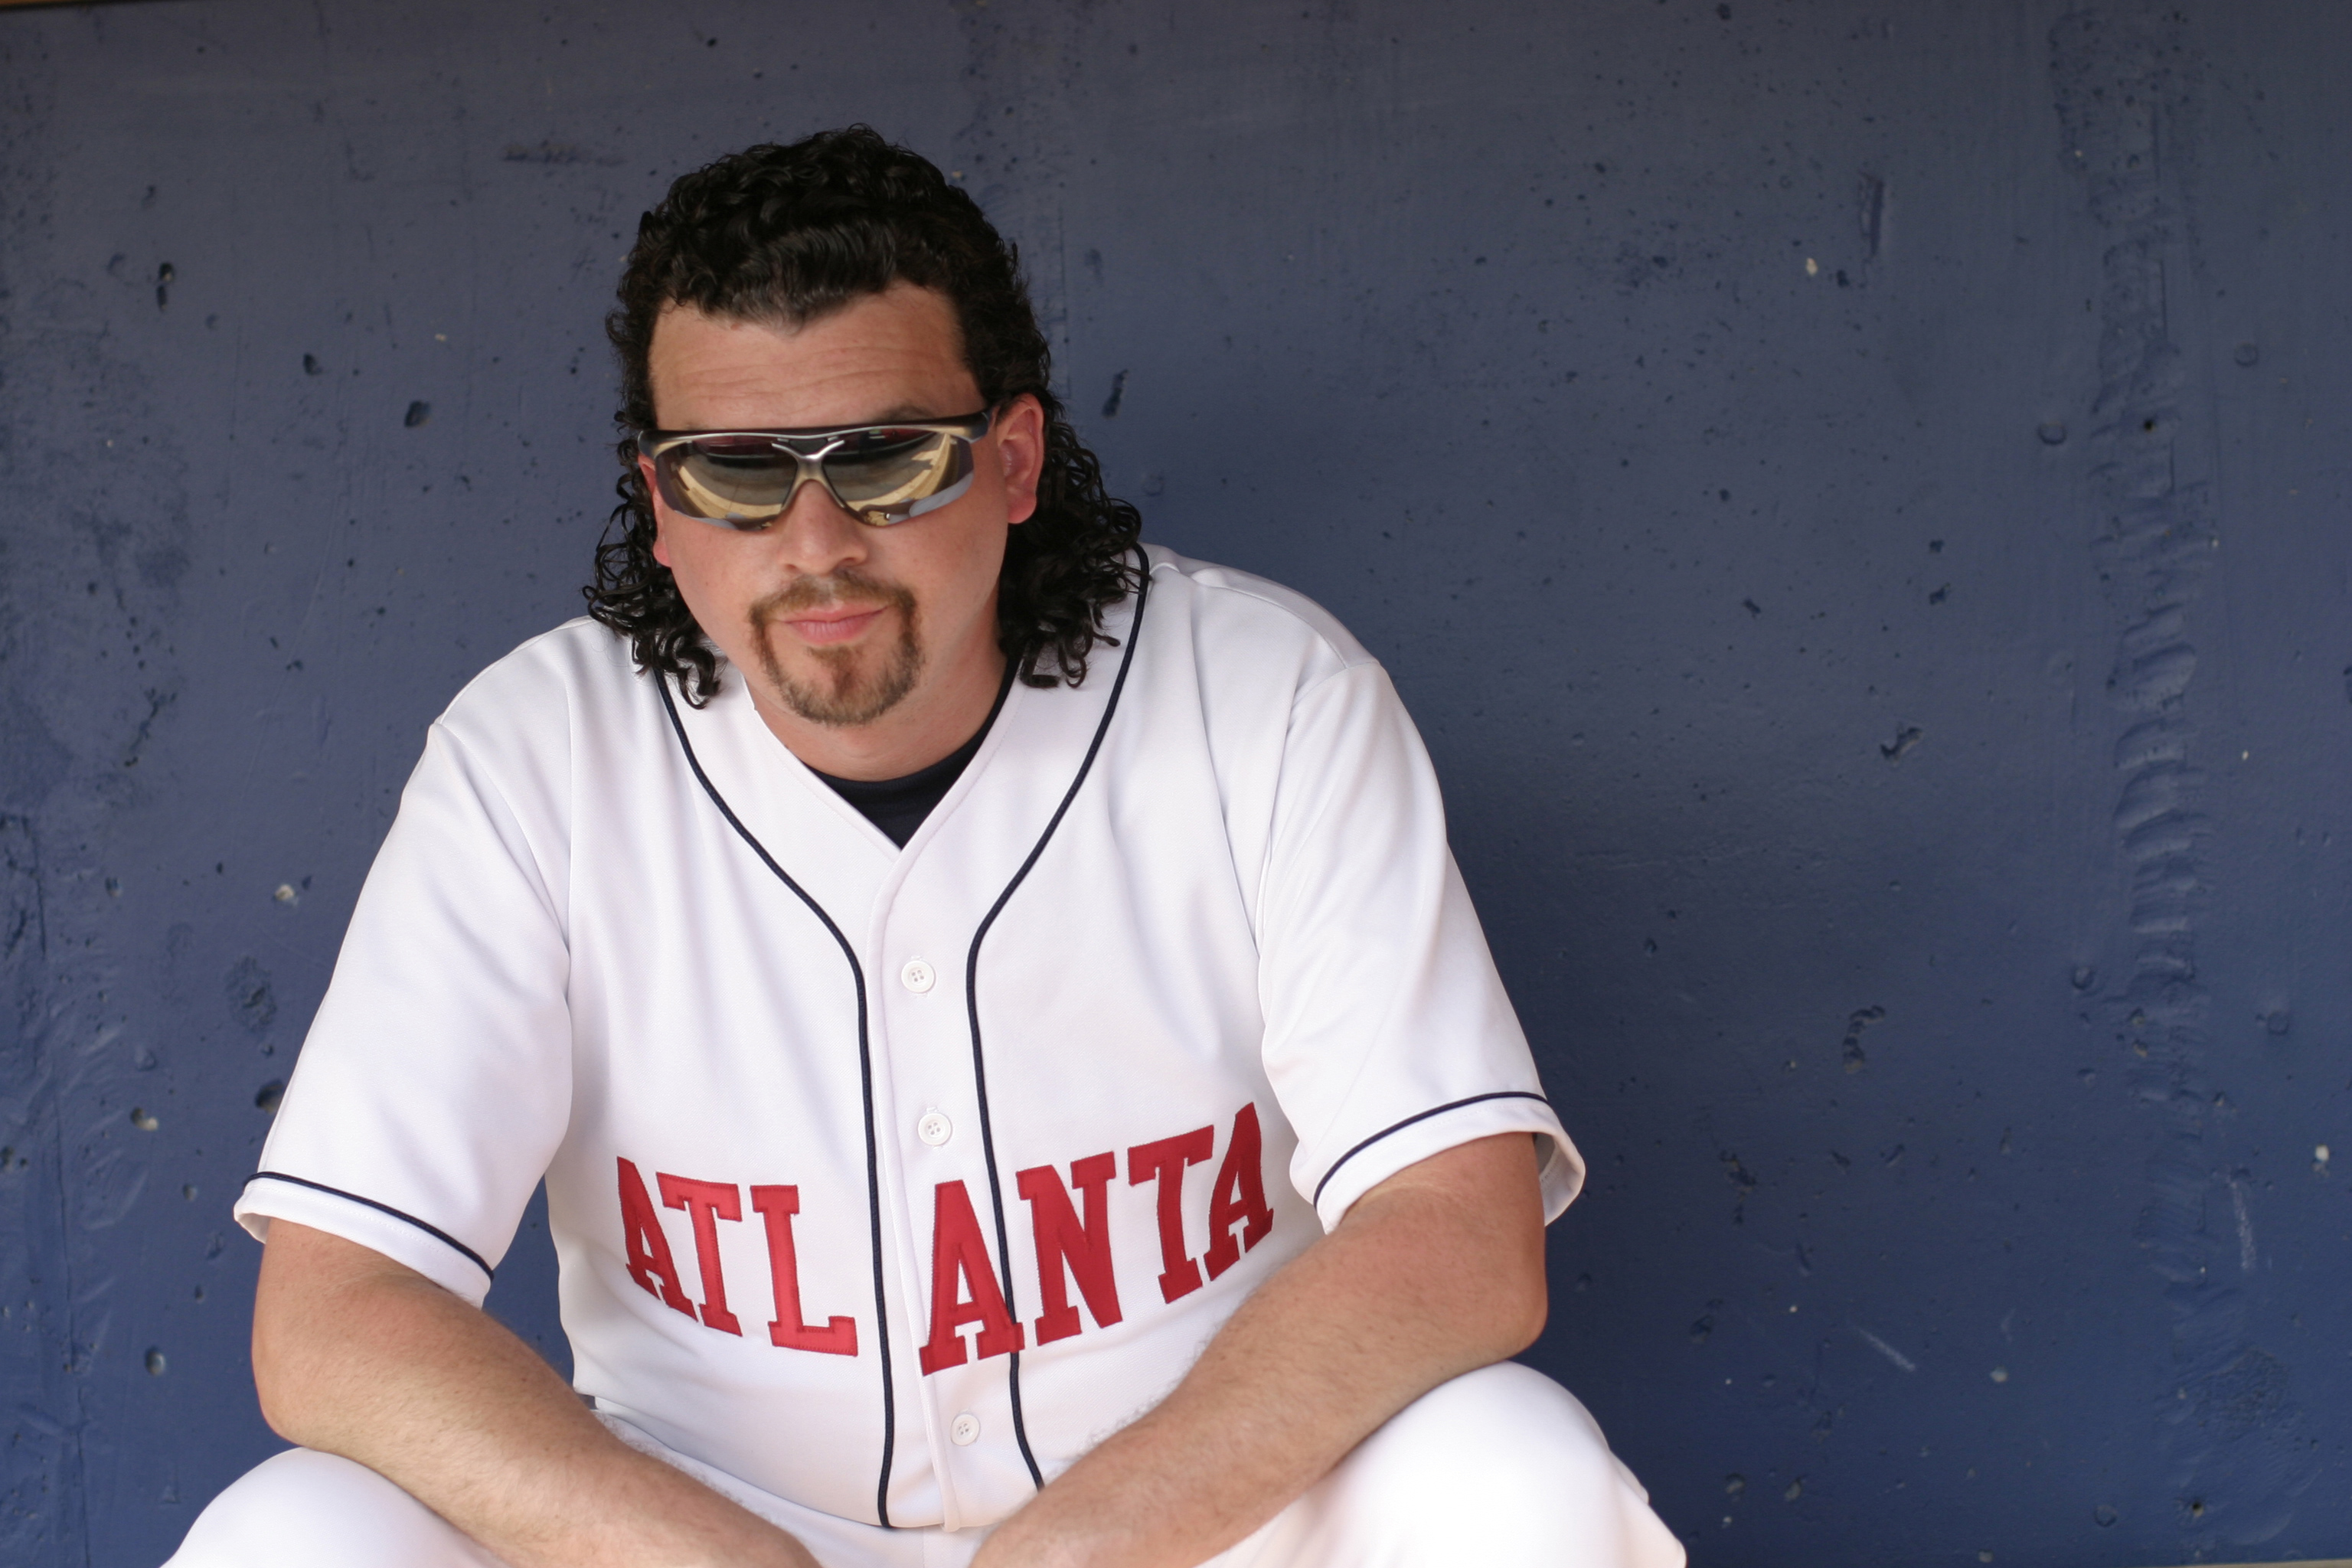 Eastbound & Down: Kenny Powers played by Danny McBride © 2013 Home Box Office, Inc. All rights reserved. HBO® and all related programs are the property of Home Box Office, Inc.